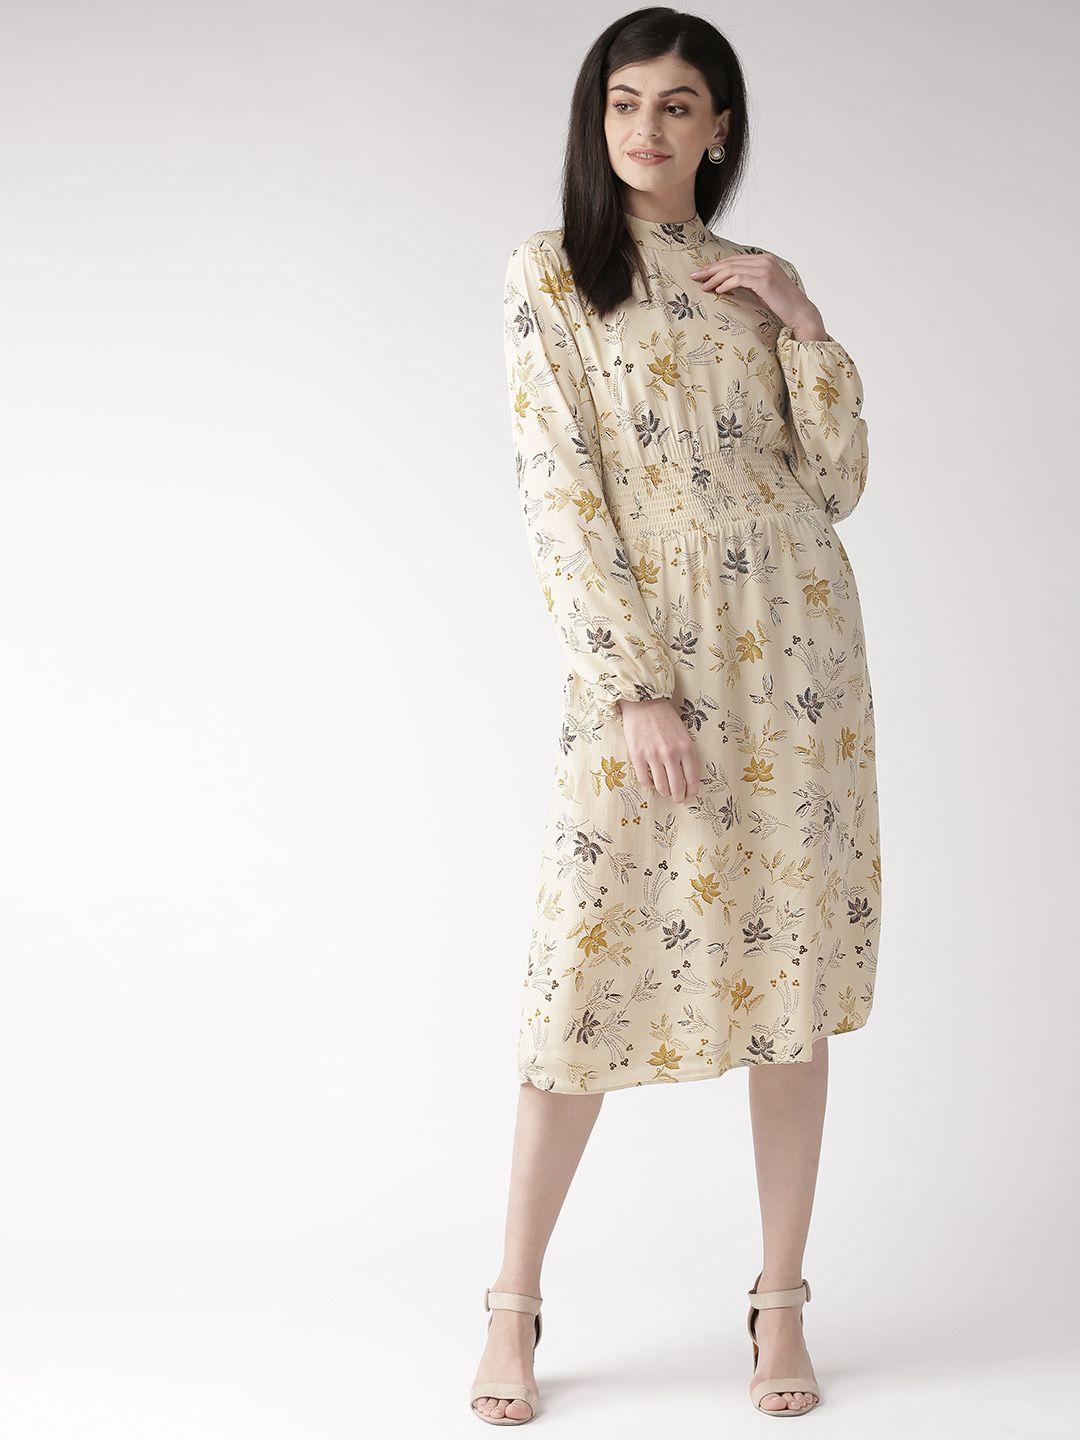 marks-&-spencer-women-cream-coloured-&-mustard-yellow-floral-printed-a-line-dress